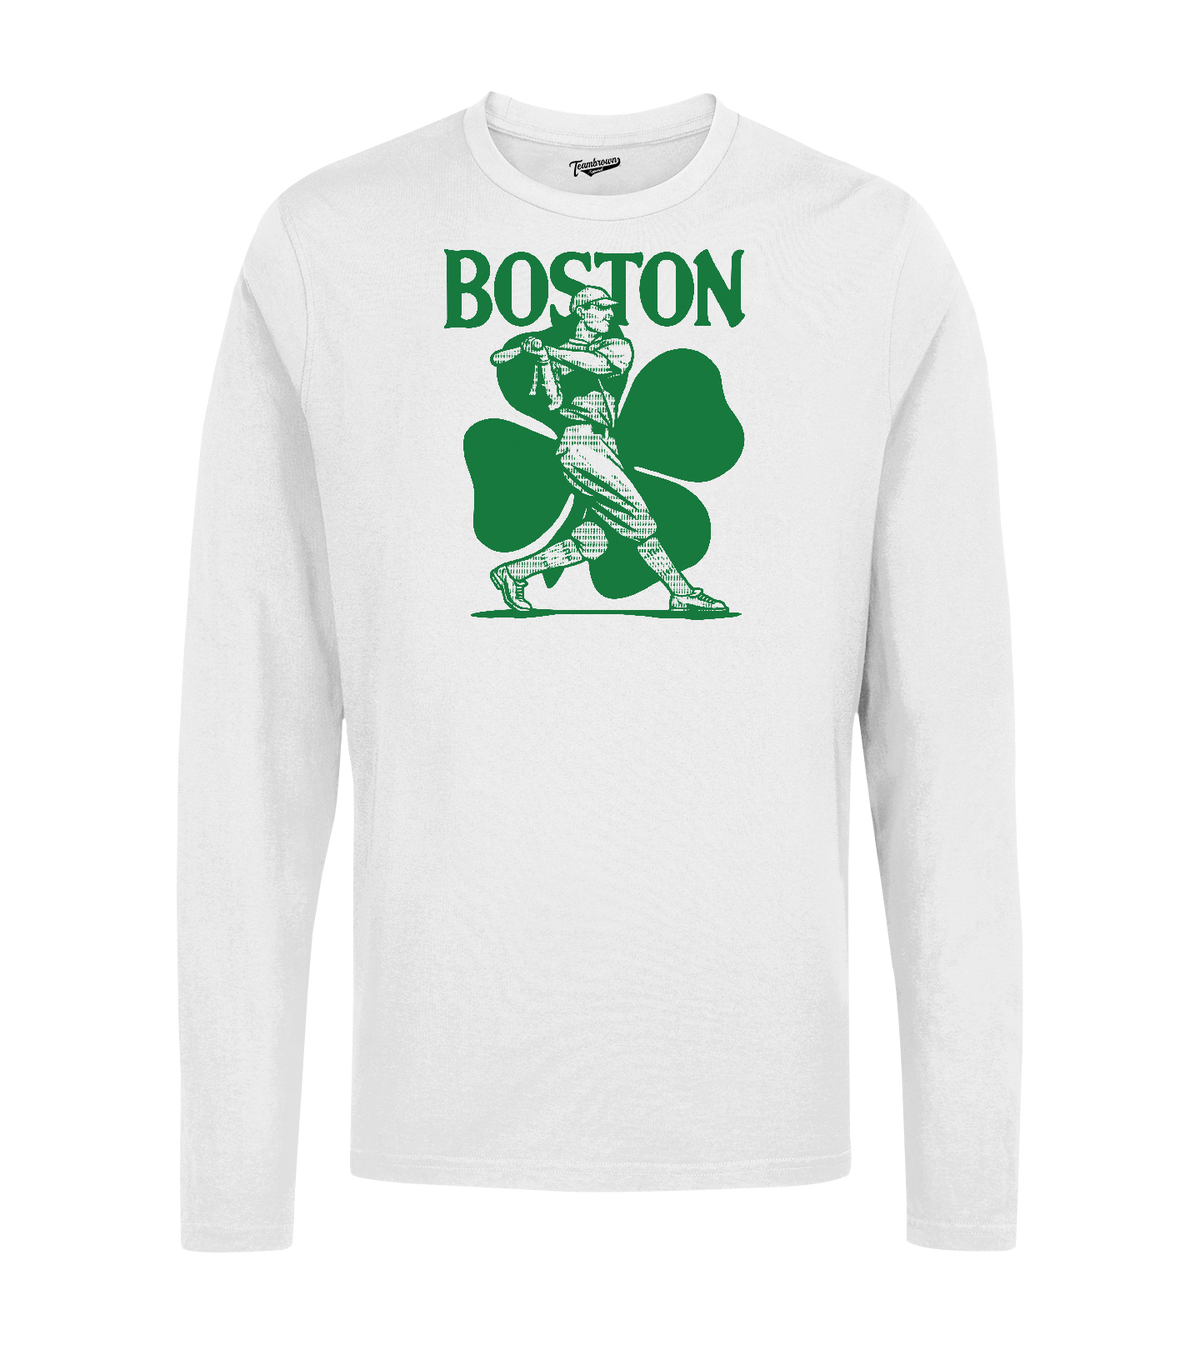 Boston (City Series) - Unisex Long Sleeve Crew T-Shirt | Officially Licensed